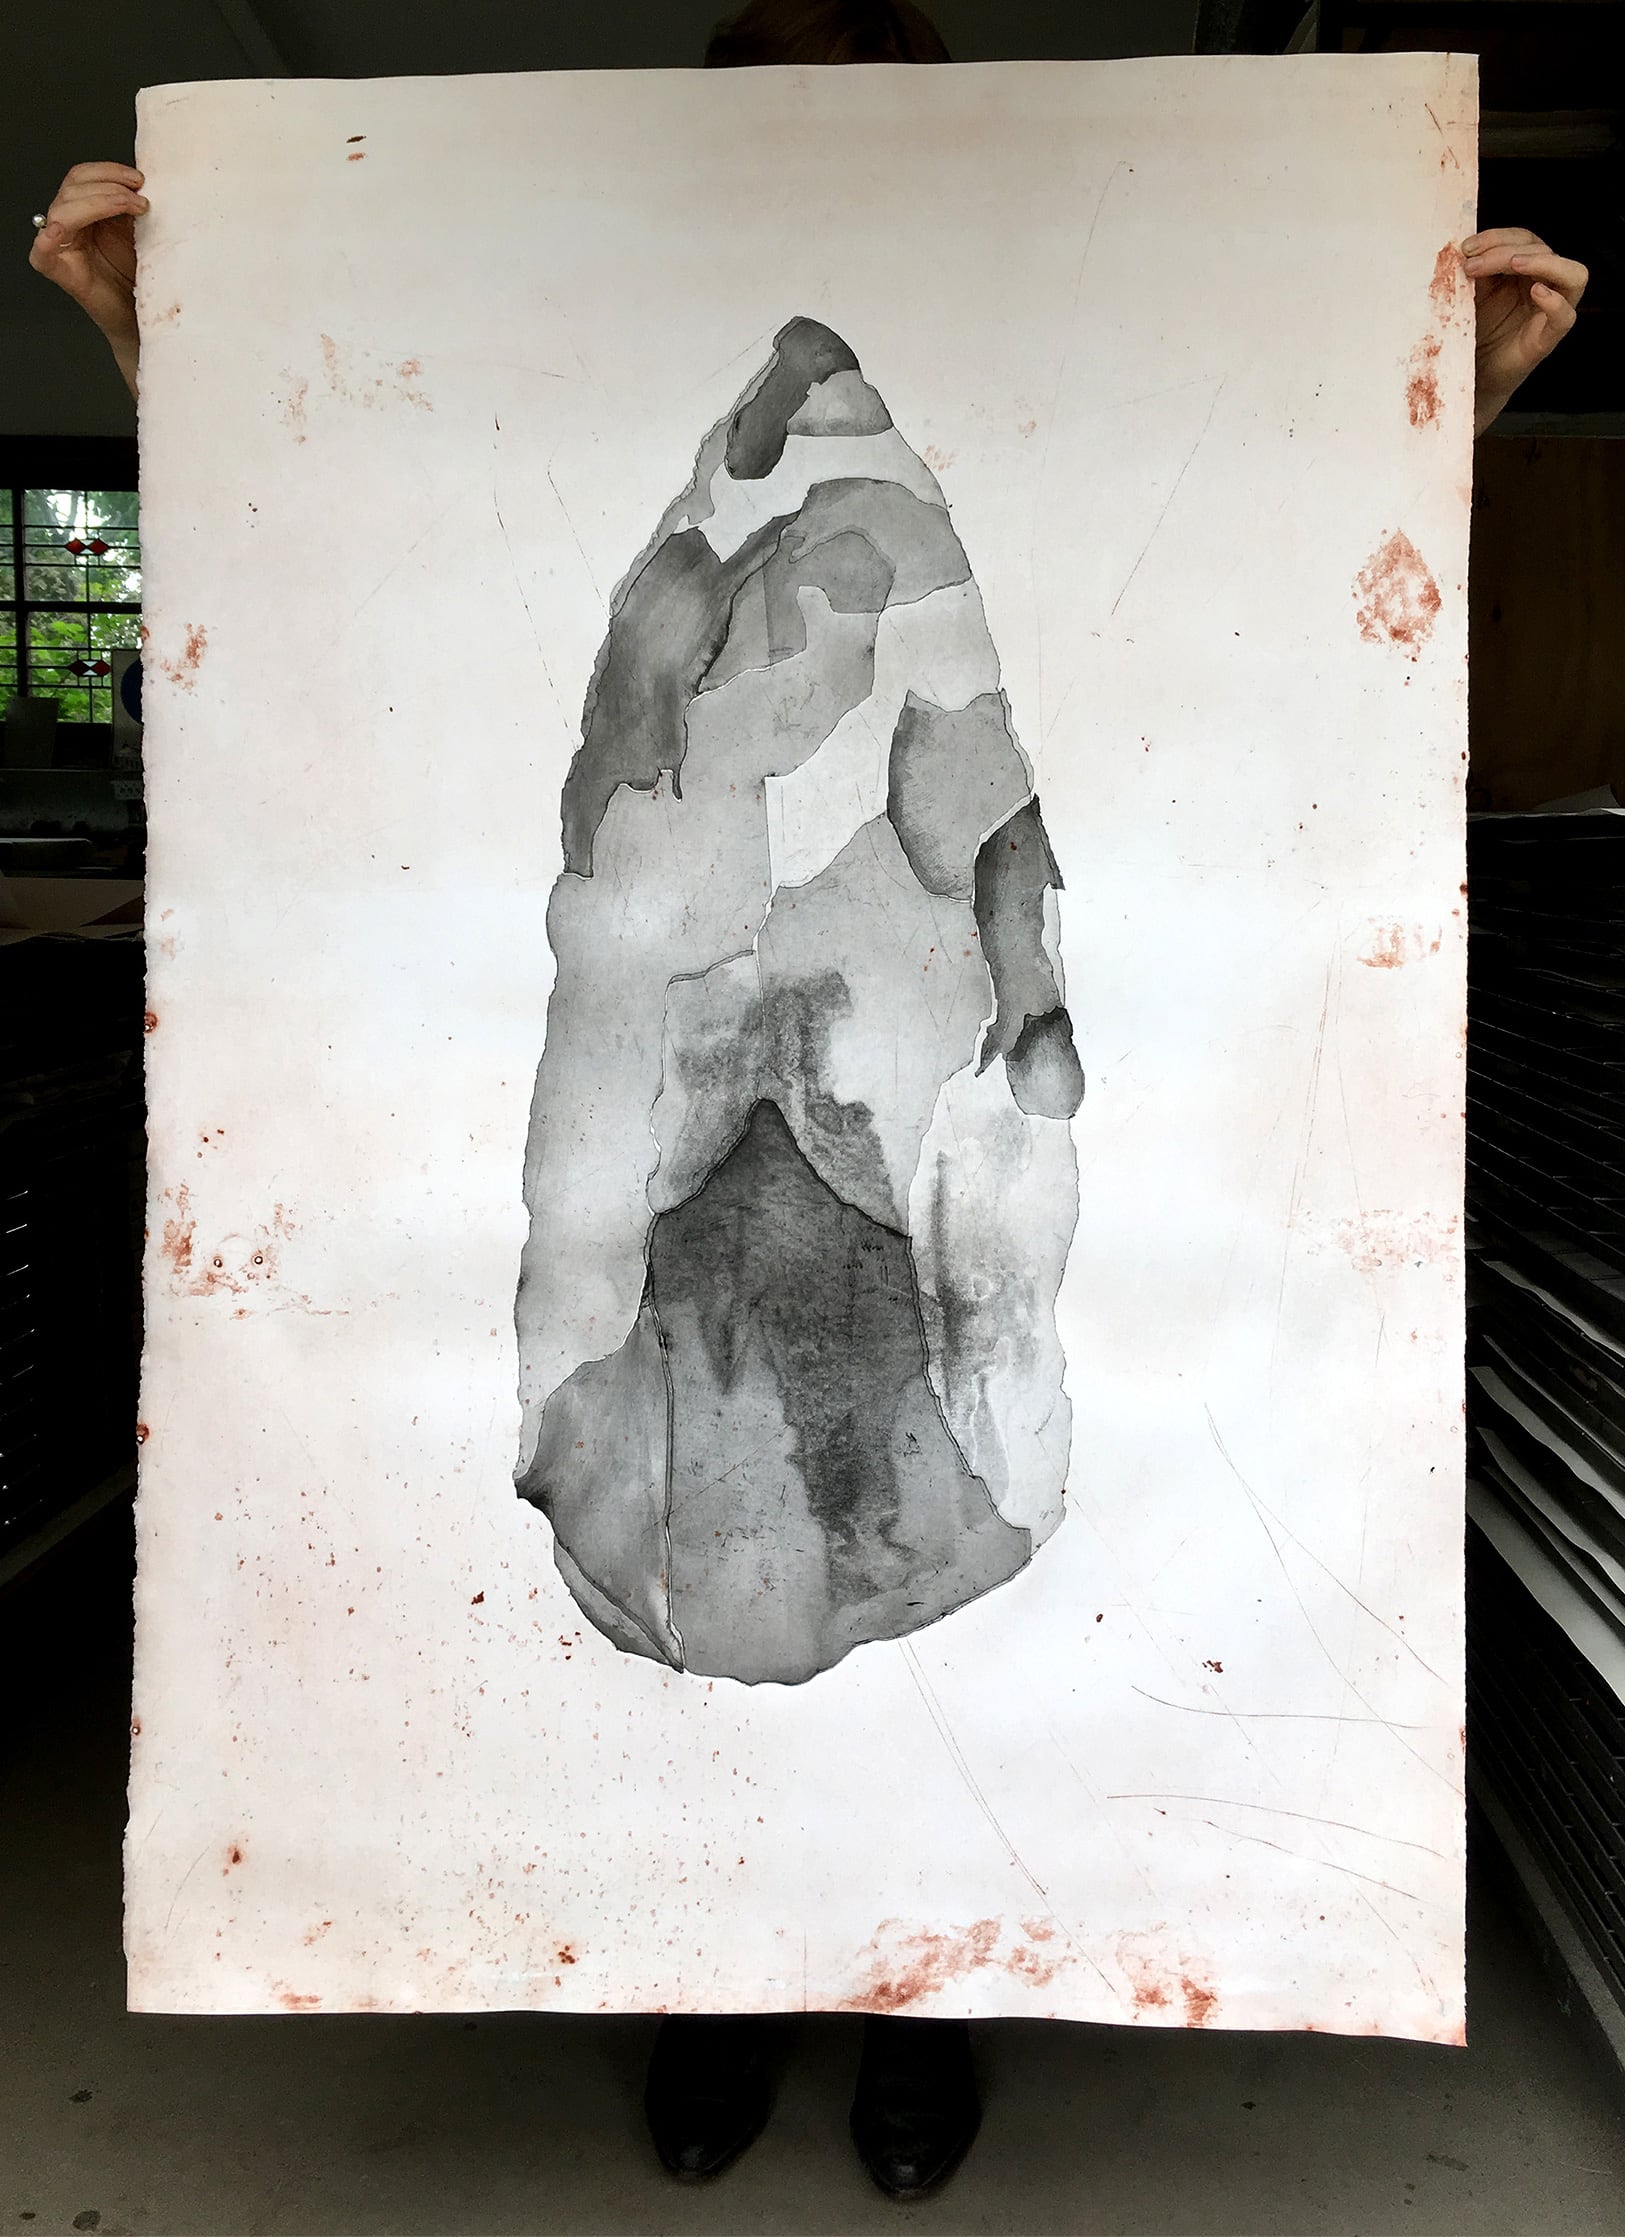 Image 03: Breckon *Stone Tool - Vic Cox Collection* 2016, monotype on Hahnemuhle paper 350gsm. Image courtesy the artist.